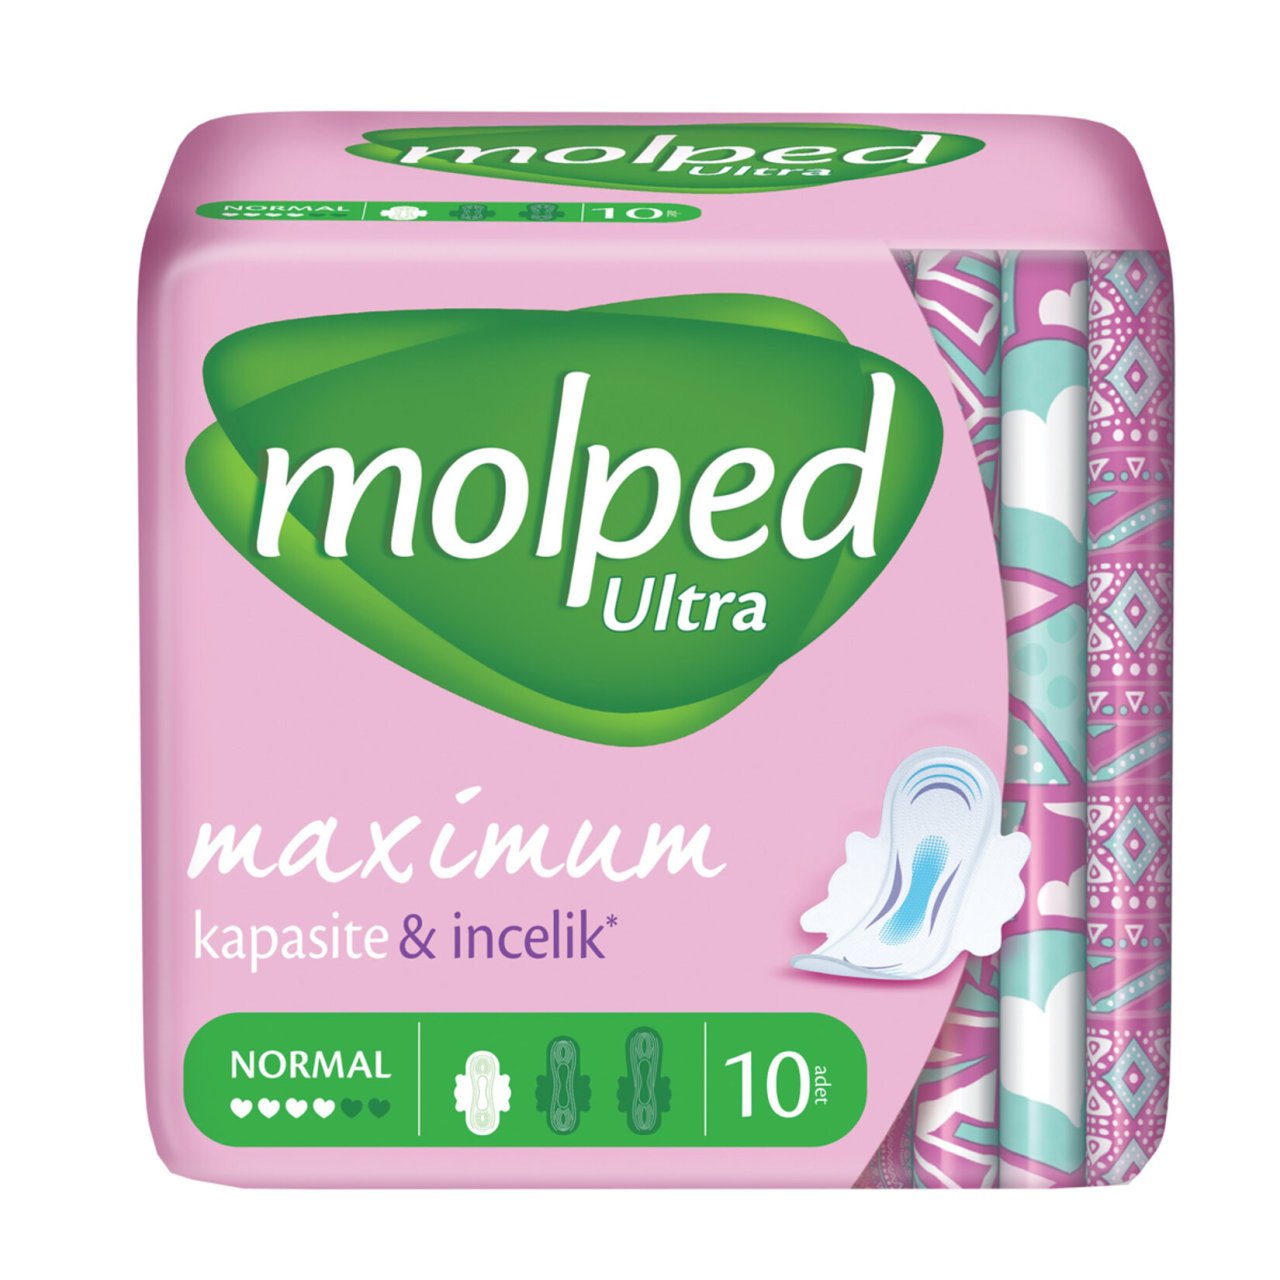 MOLPED T.ULTRA  1NORMAL 10LU 1*24